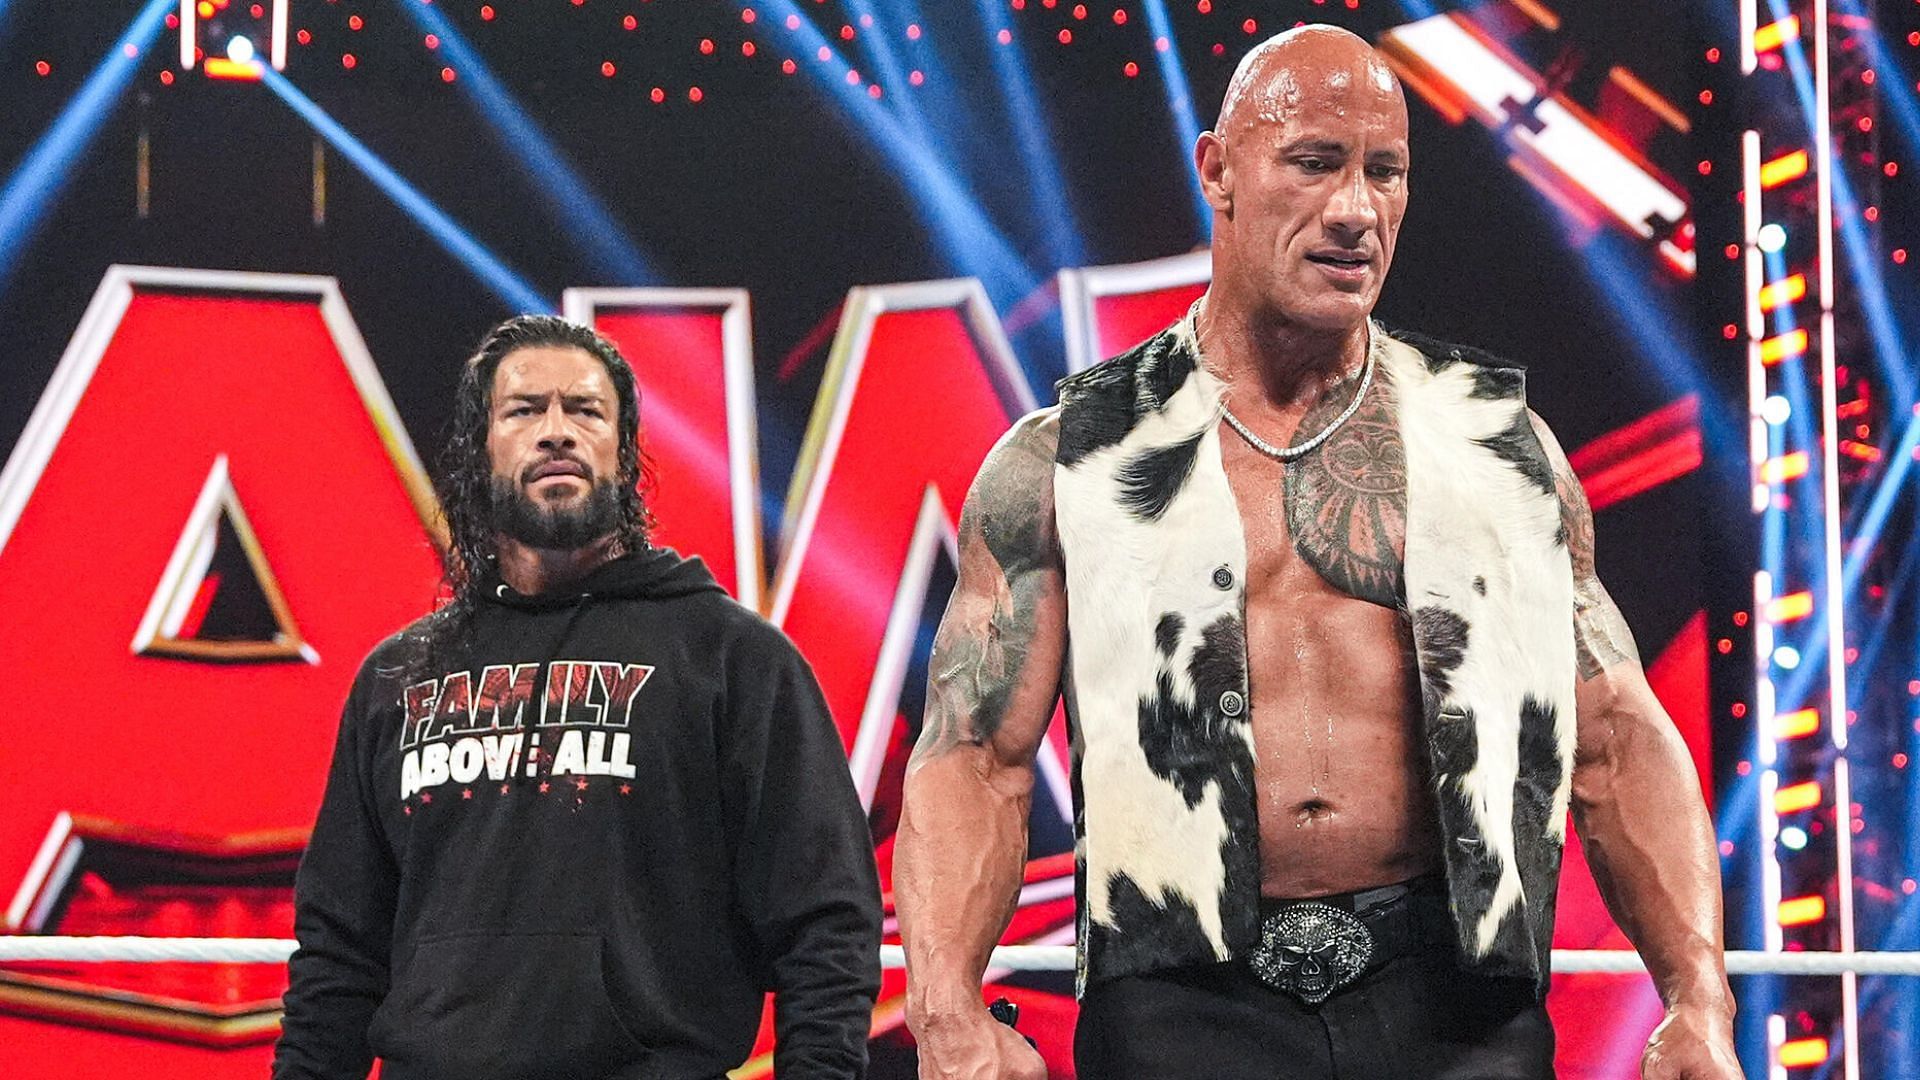 The Rock and Roman Reigns on the final RAW before WrestleMania XL!